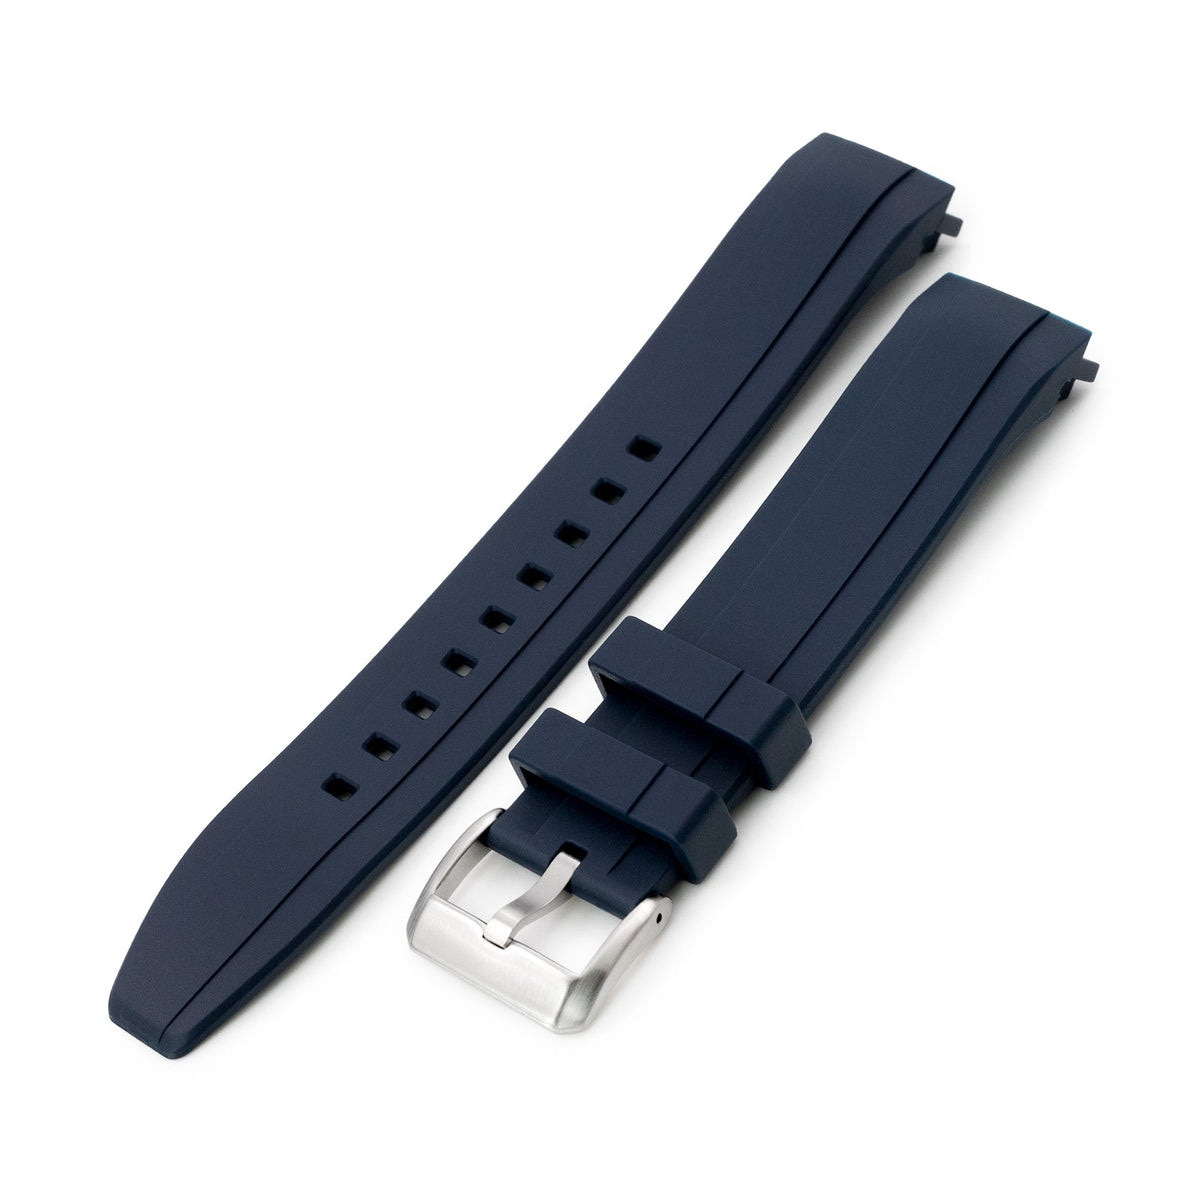 StrapXPro Lite - MX1A Rubber Strap for New Seiko Monster 4th Gen., Cloudbrust Blue Strapcode Watch Bands